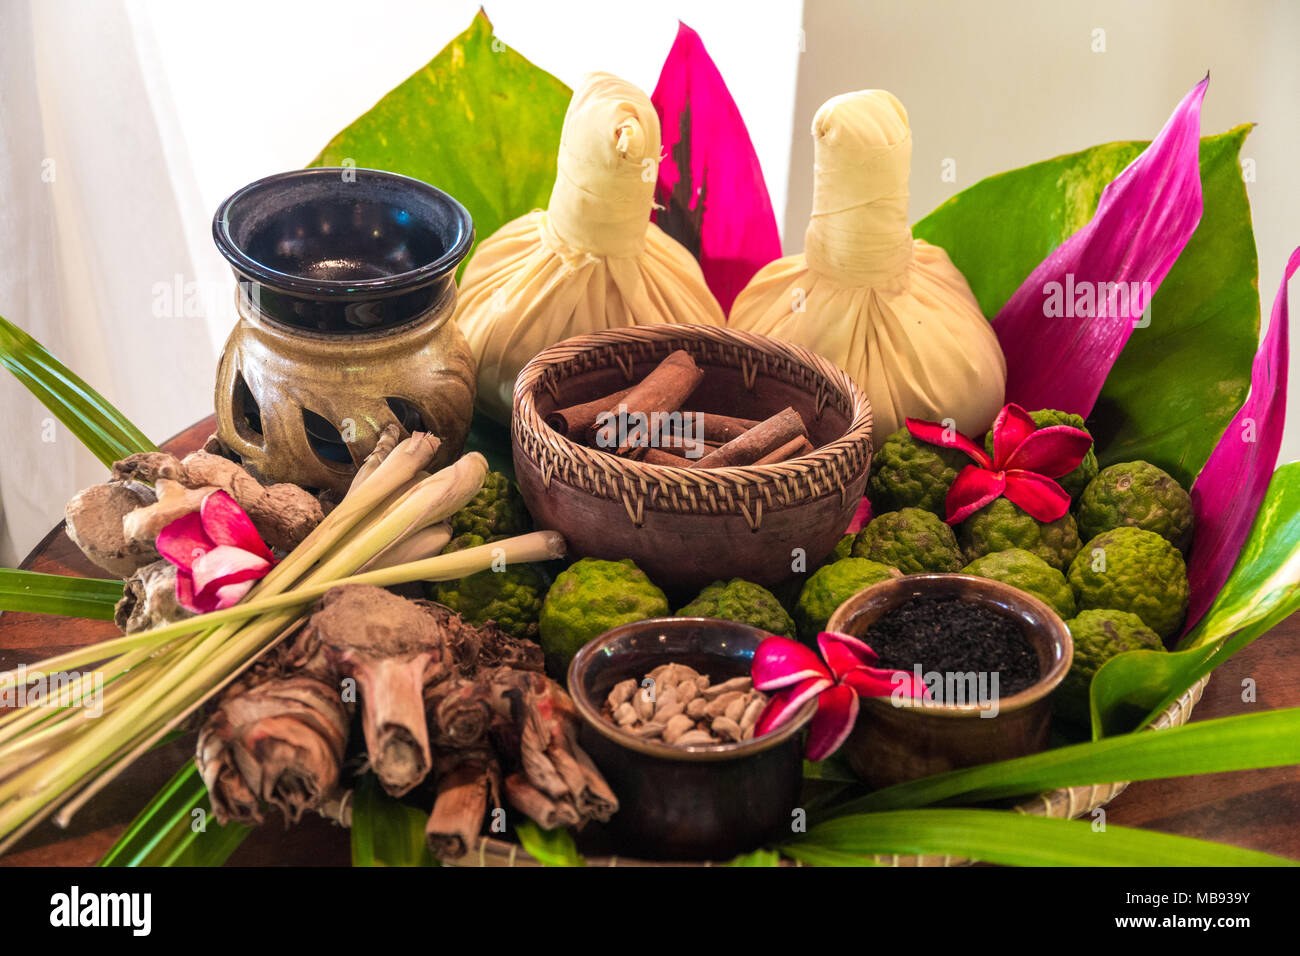 A basket with natural Spa ingredients, like cinnamon sticks, makrut lime, lemon grass, turmeric, bowls with seeds and two massage compress balls. Stock Photo